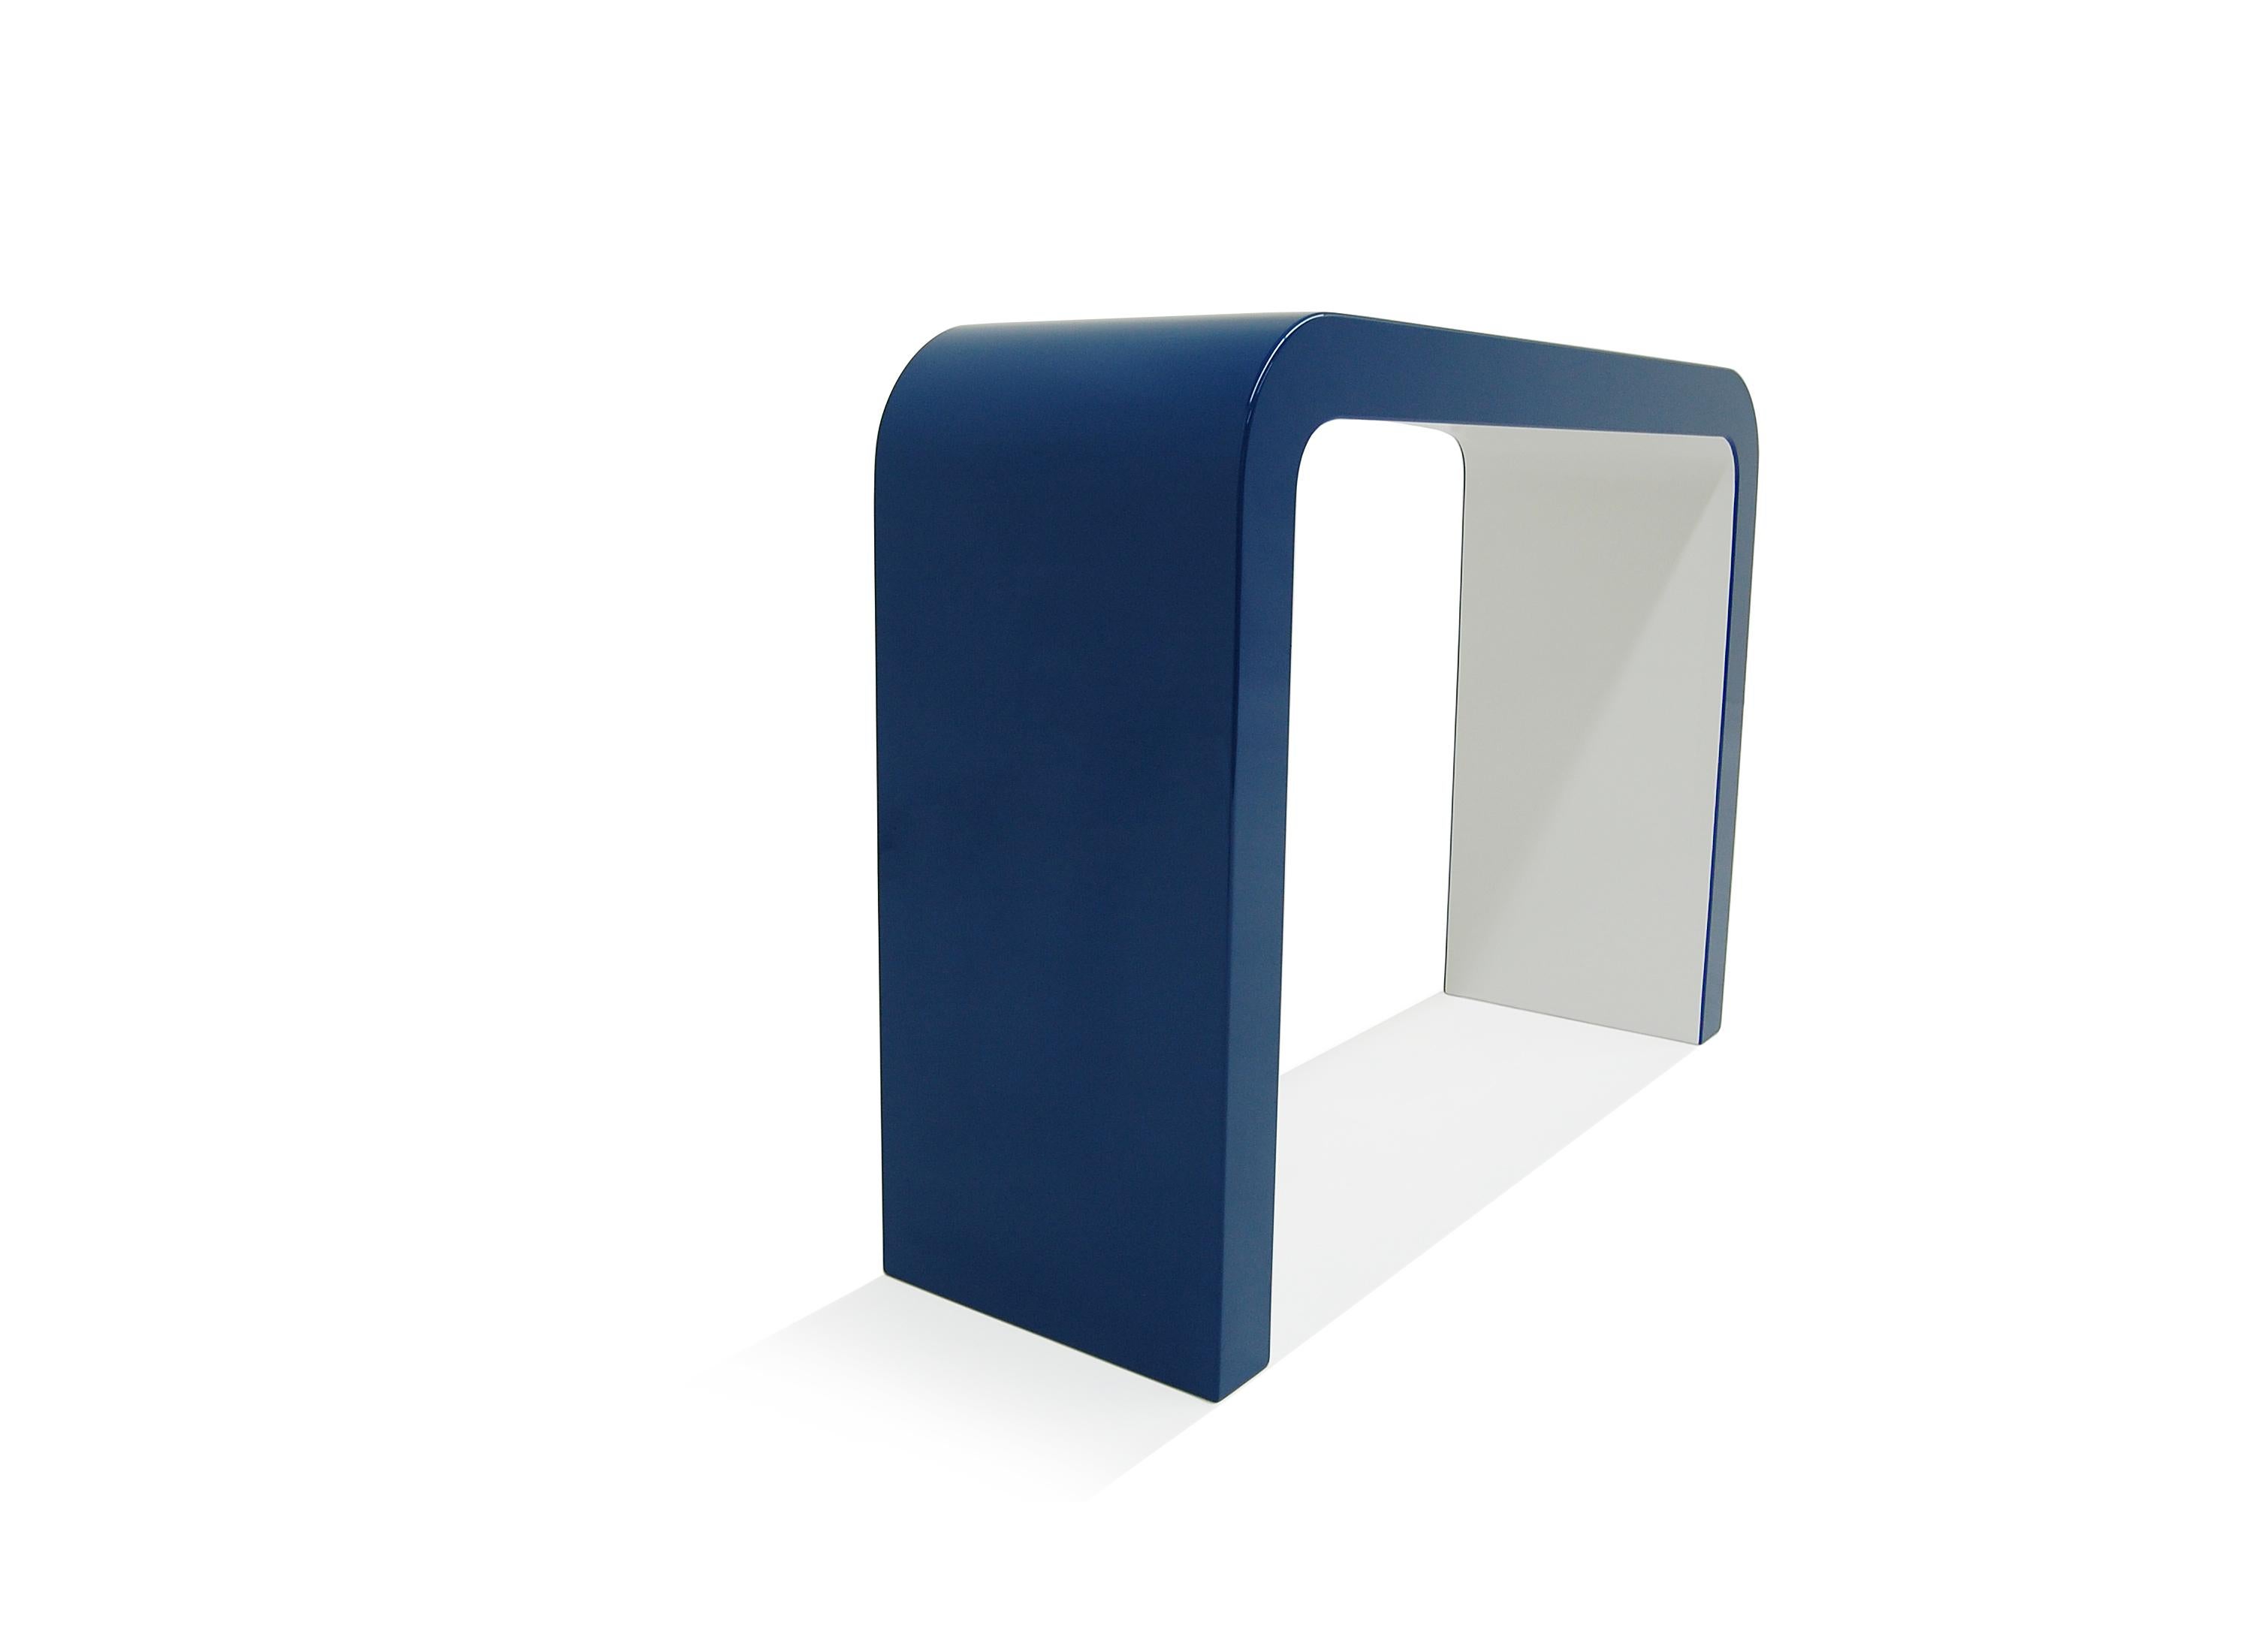 American Soho Console Rounded Corners Blue White lacquered  For Sale